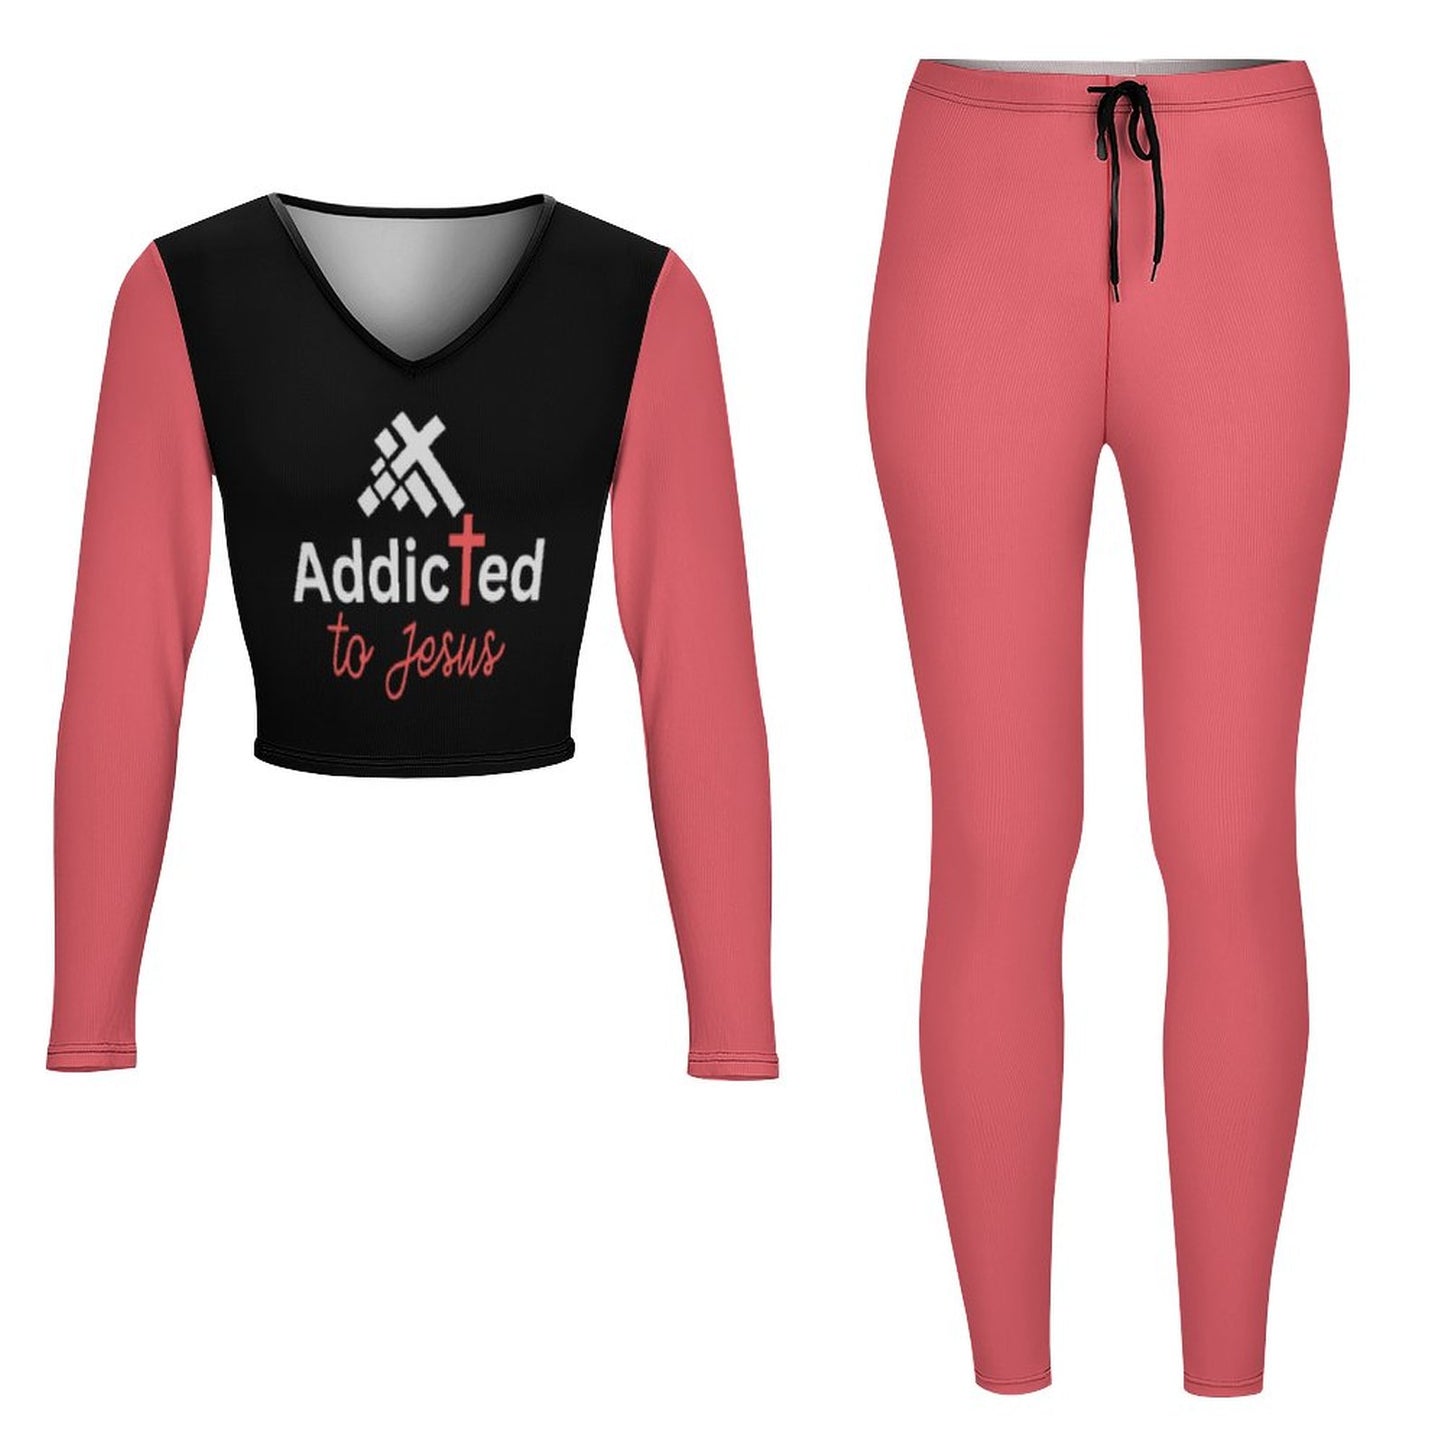 Addicted To Jesus Women's Christian Casual Outfit V neck Sweatshirt Set  SALE-Personal Design